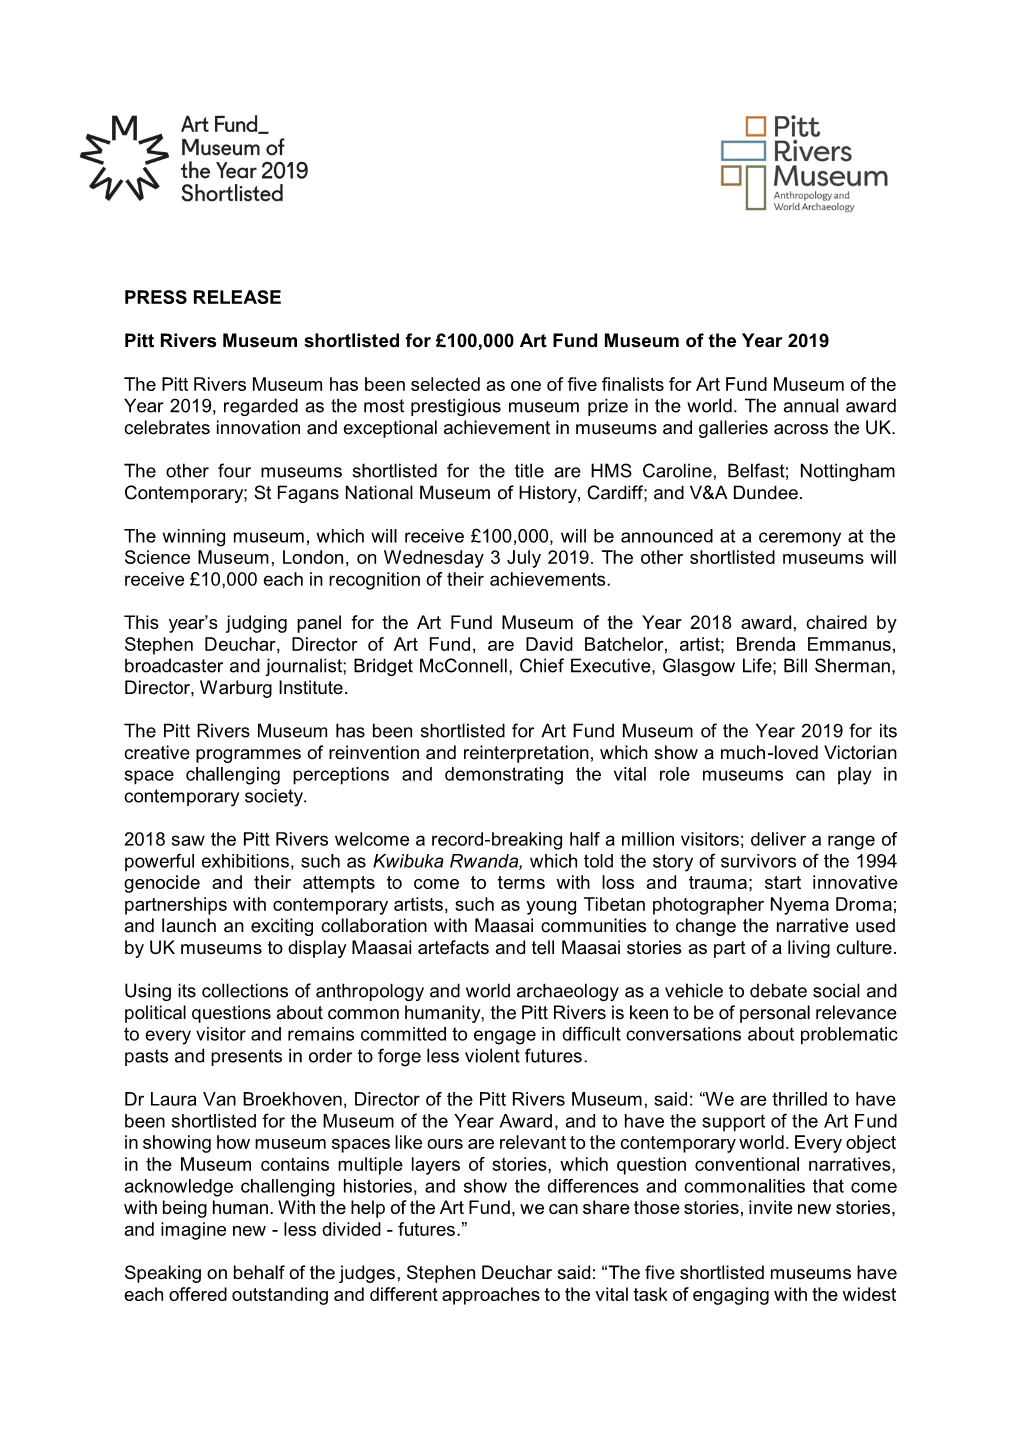 Art Fund Museum of the Year 2019 Press Release